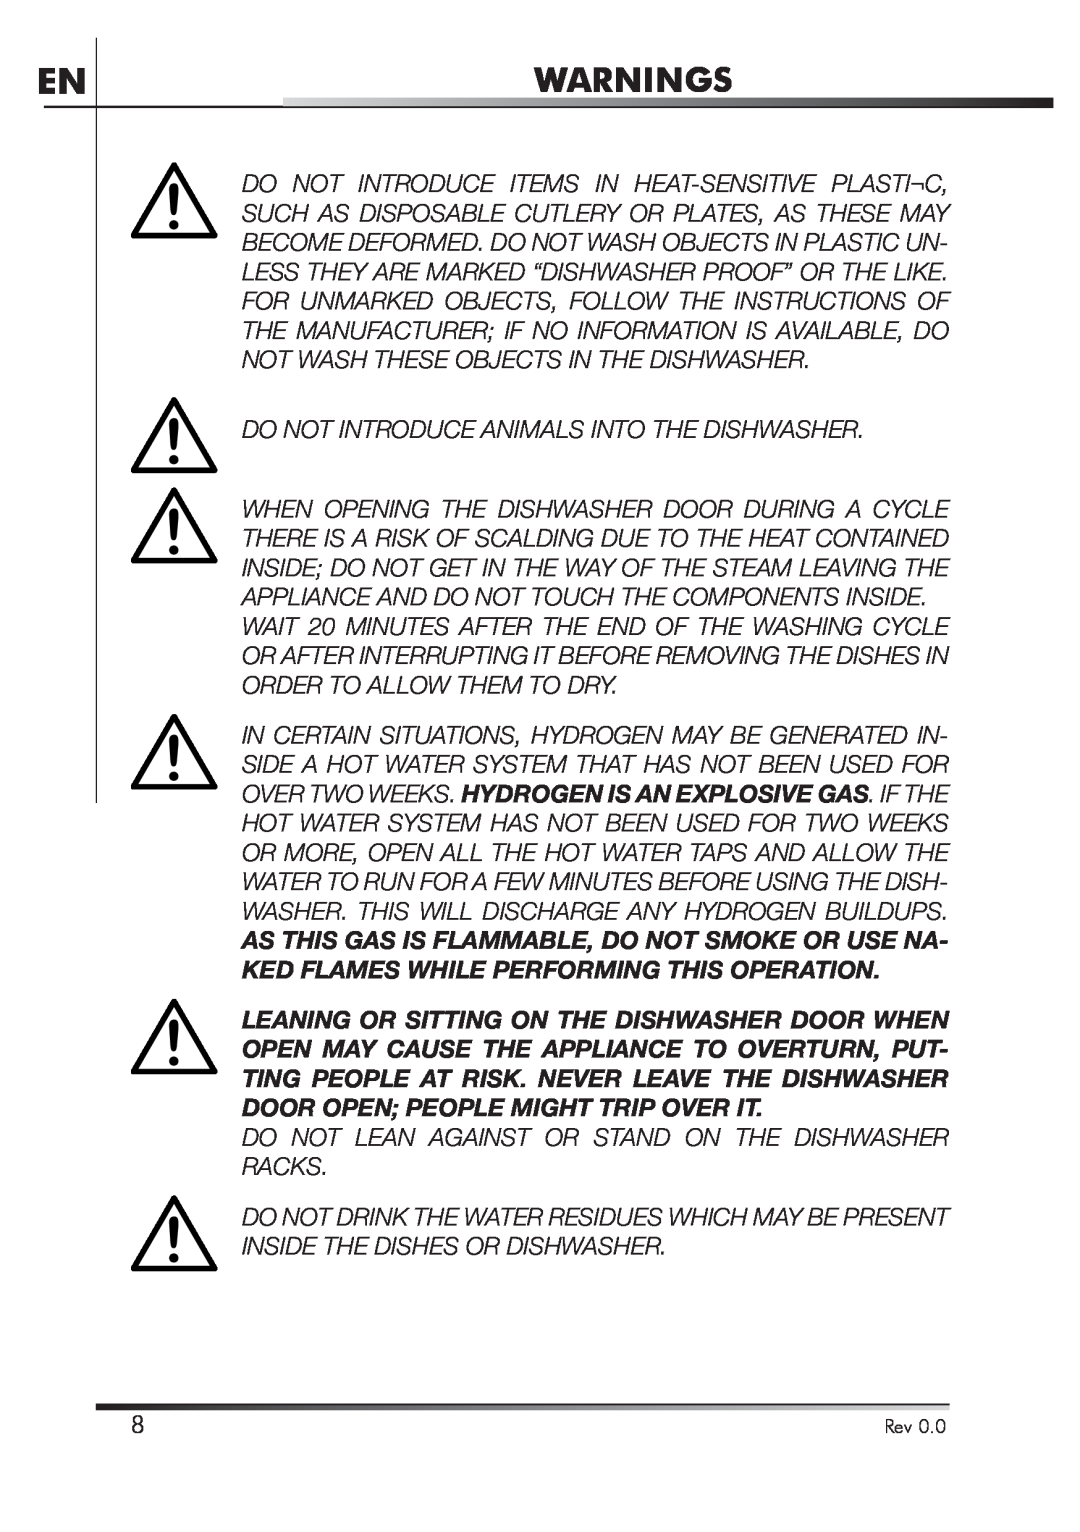 Smeg STA4645U Warnings, Do Not Introduce Animals Into The Dishwasher, Do Not Lean Against Or Stand On The Dishwasher Racks 